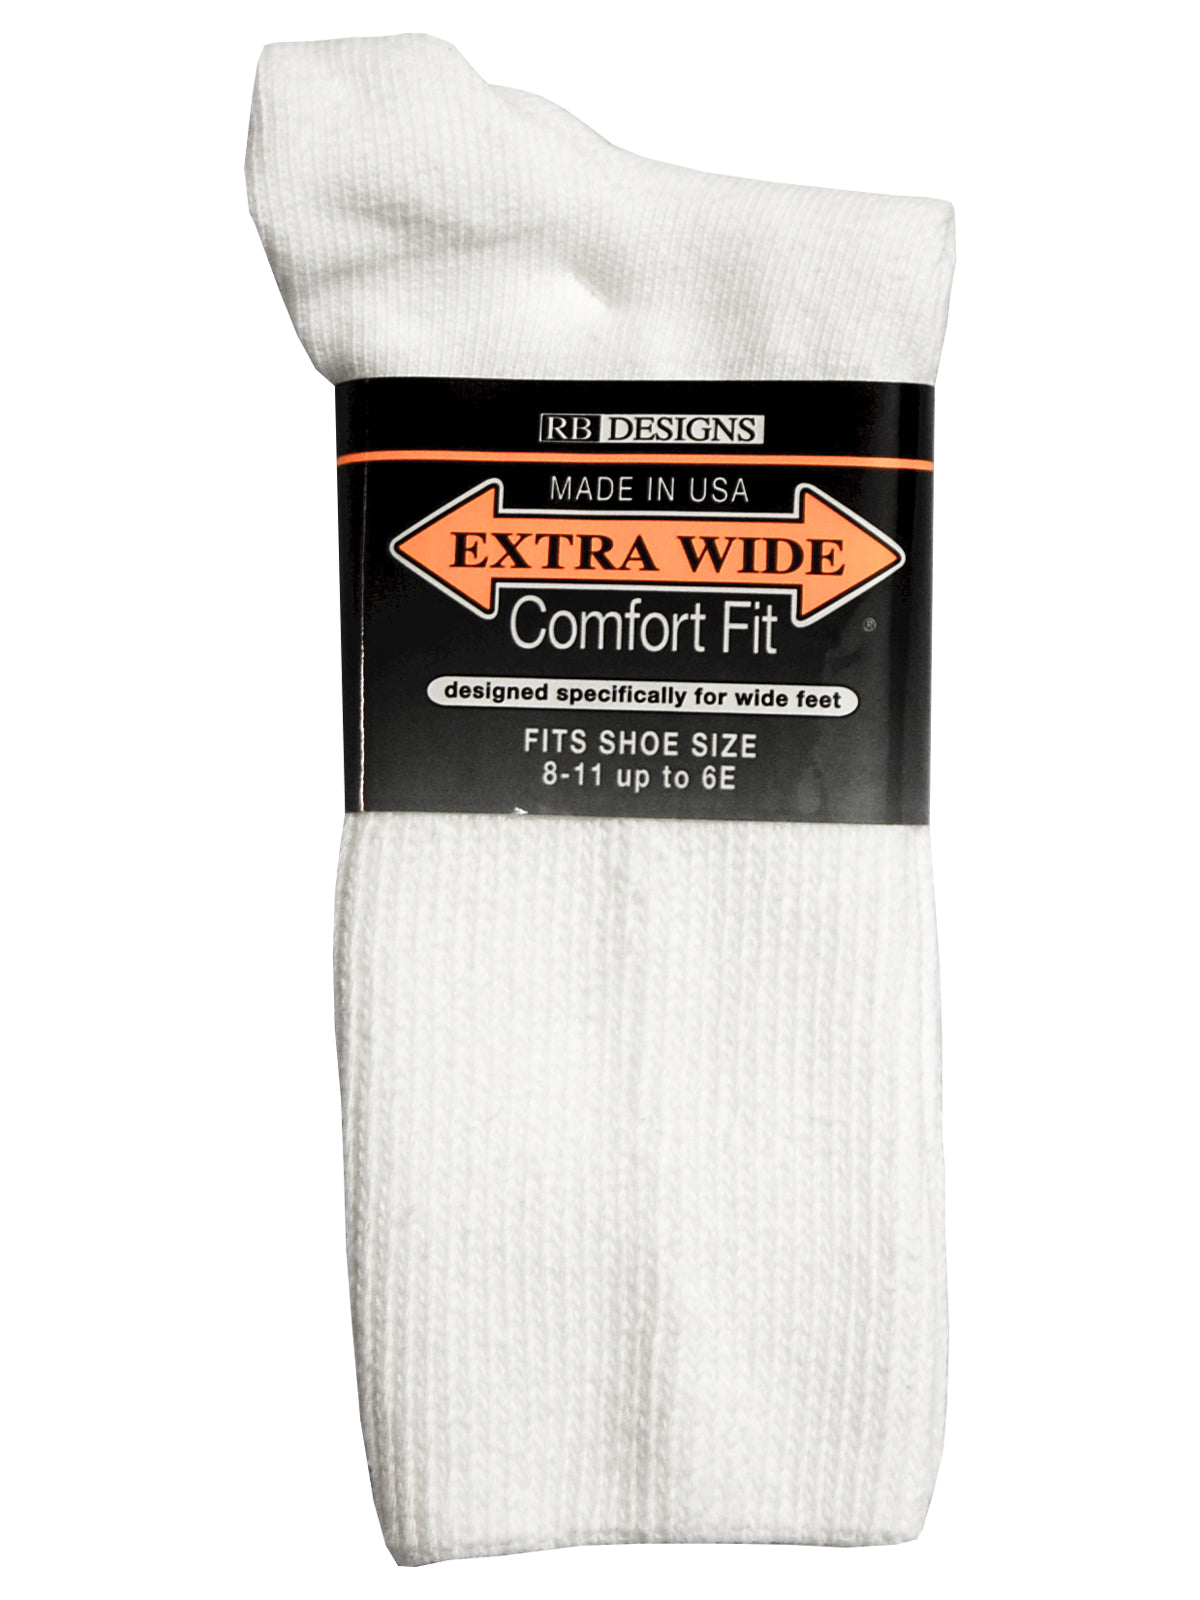 Extra Wide Men's Comfort Fit Athletic Crew Socks in White - Size Large (12 - 16)